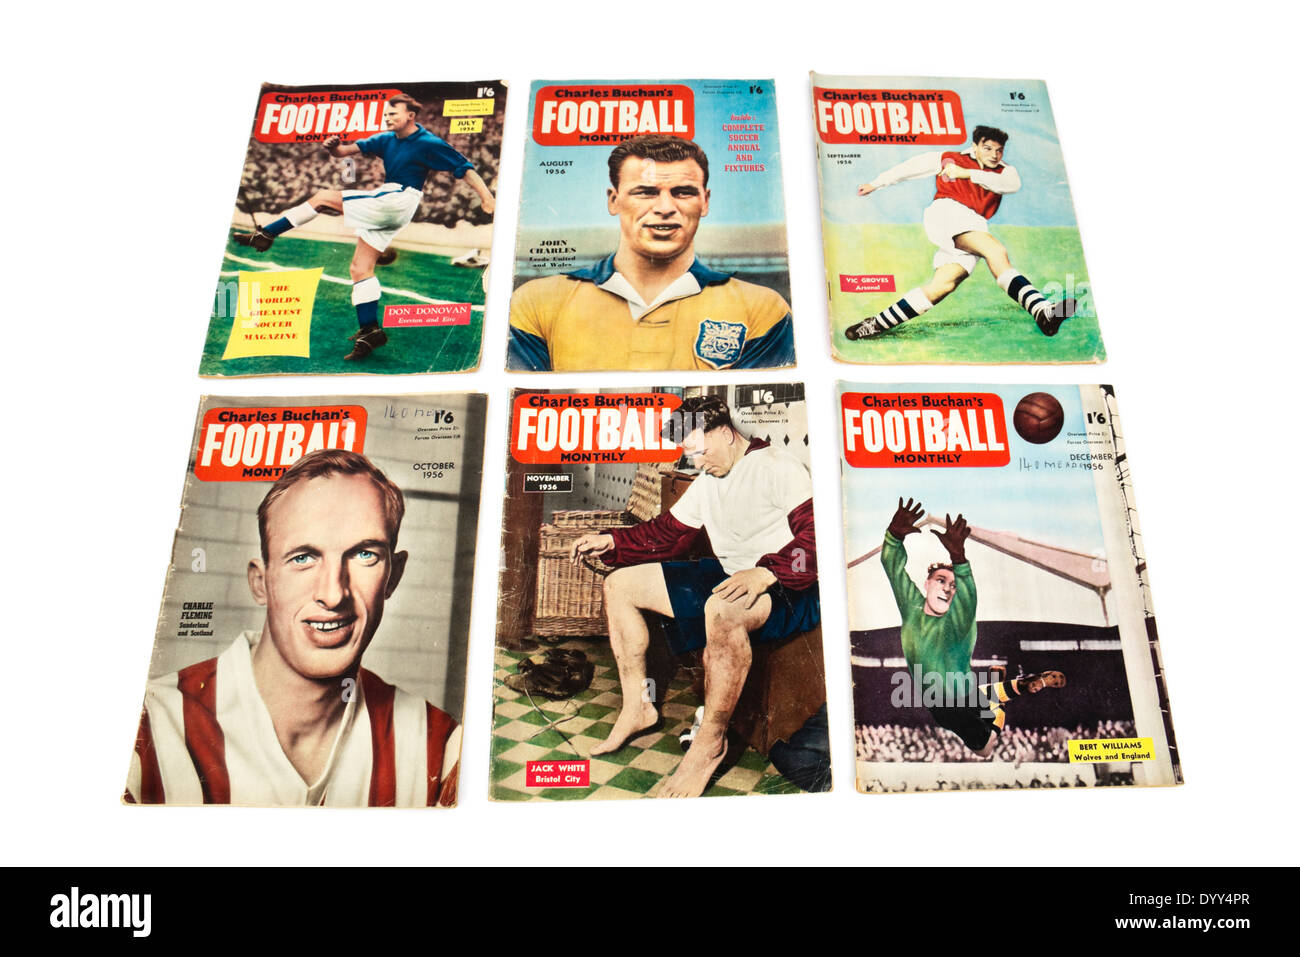 Collection of vintage 1950's 'Charles Buchan's Football Monthly' magazines. Stock Photo